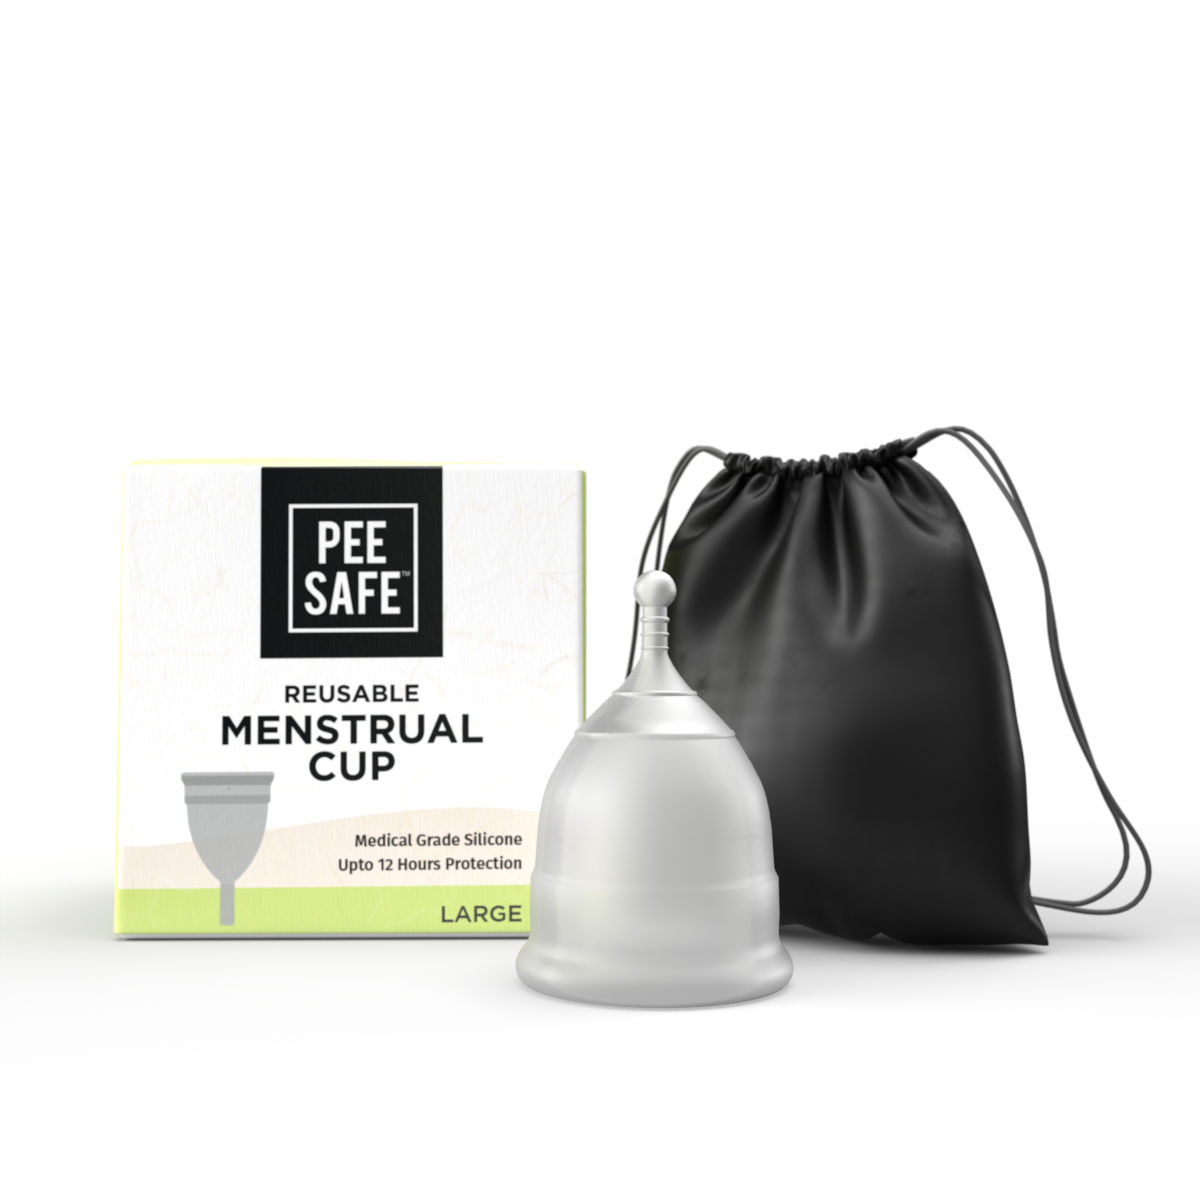 Buy Pee Safe Reusable Menstrual Cup Large, 1 Count Online